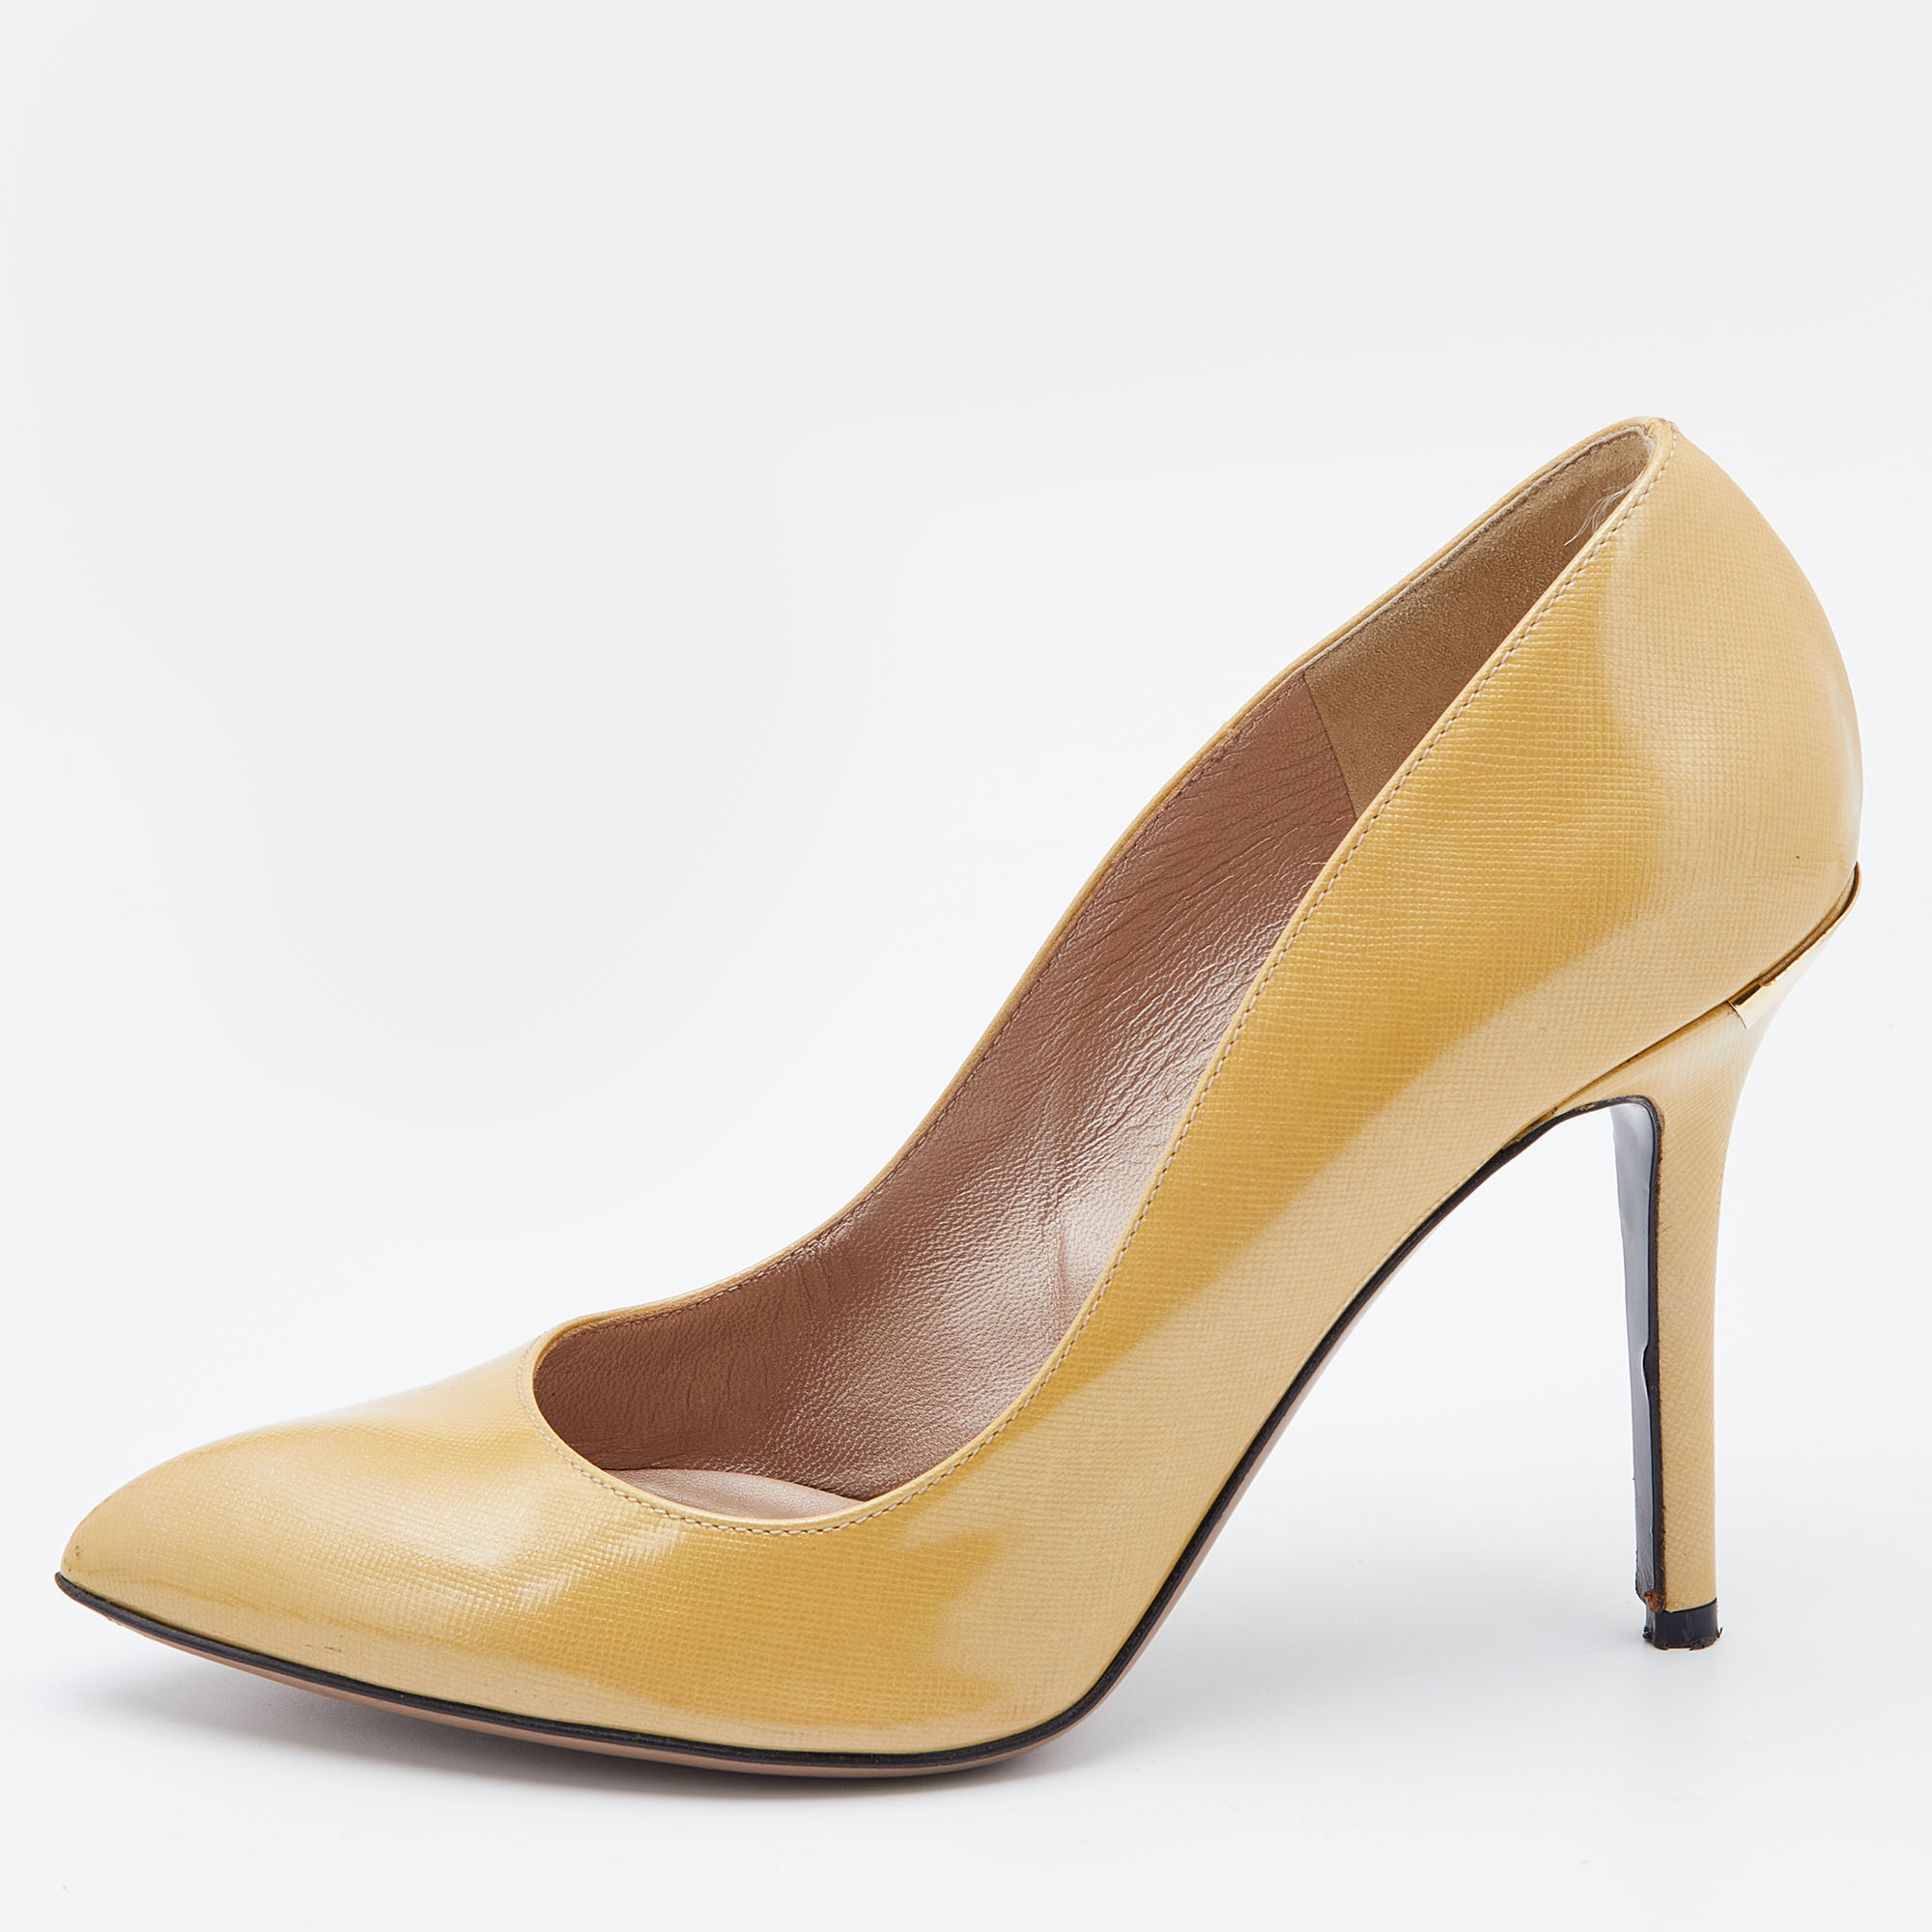 Pre-owned Versace Light Yellow Patent Leather Pointed Toe Pumps Size 38